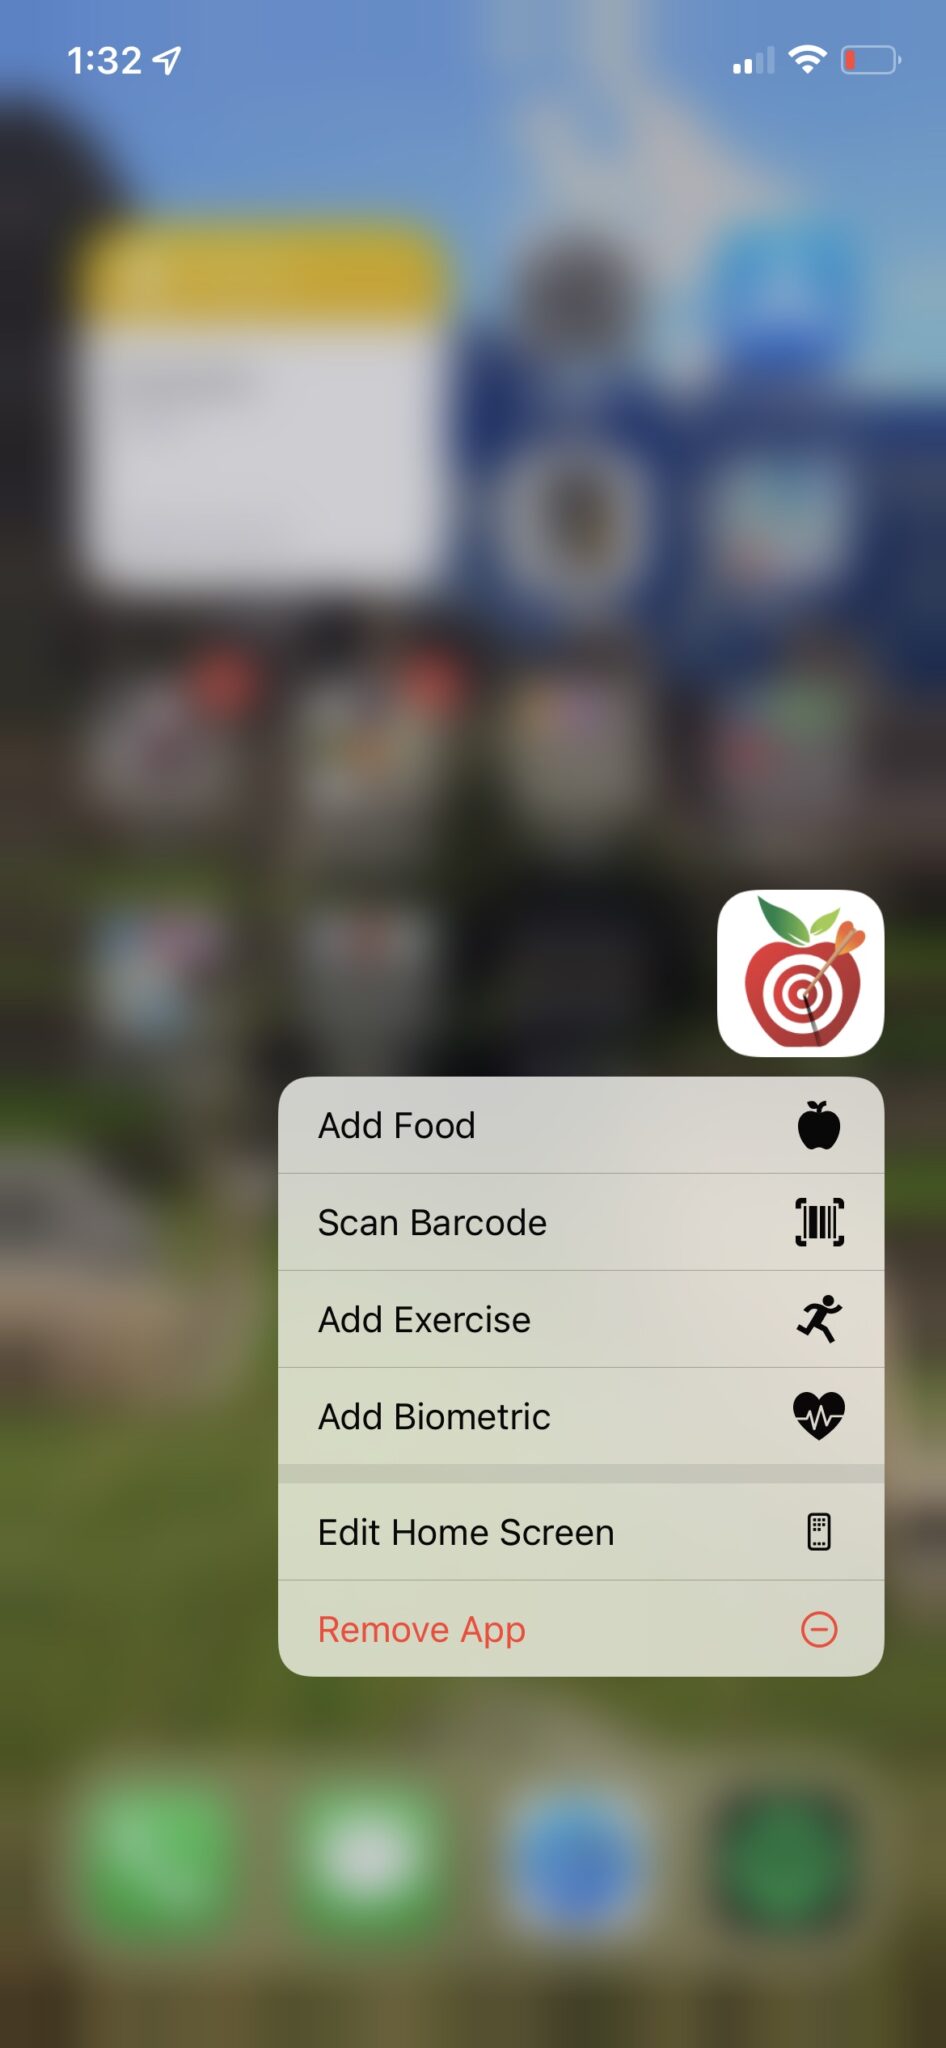 Introducing iOS quick actions!